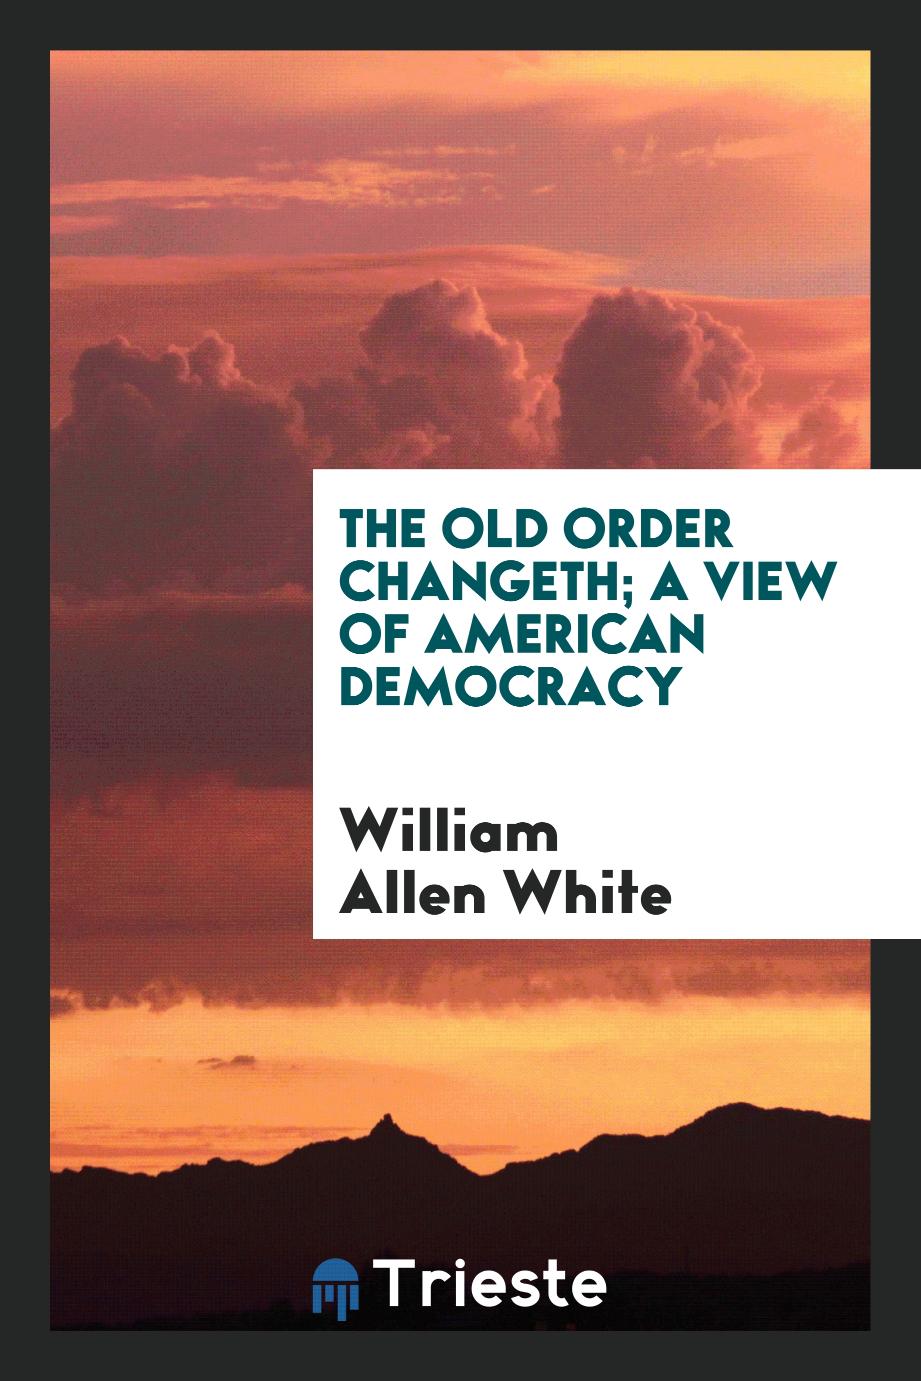 The old order changeth; a view of American democracy